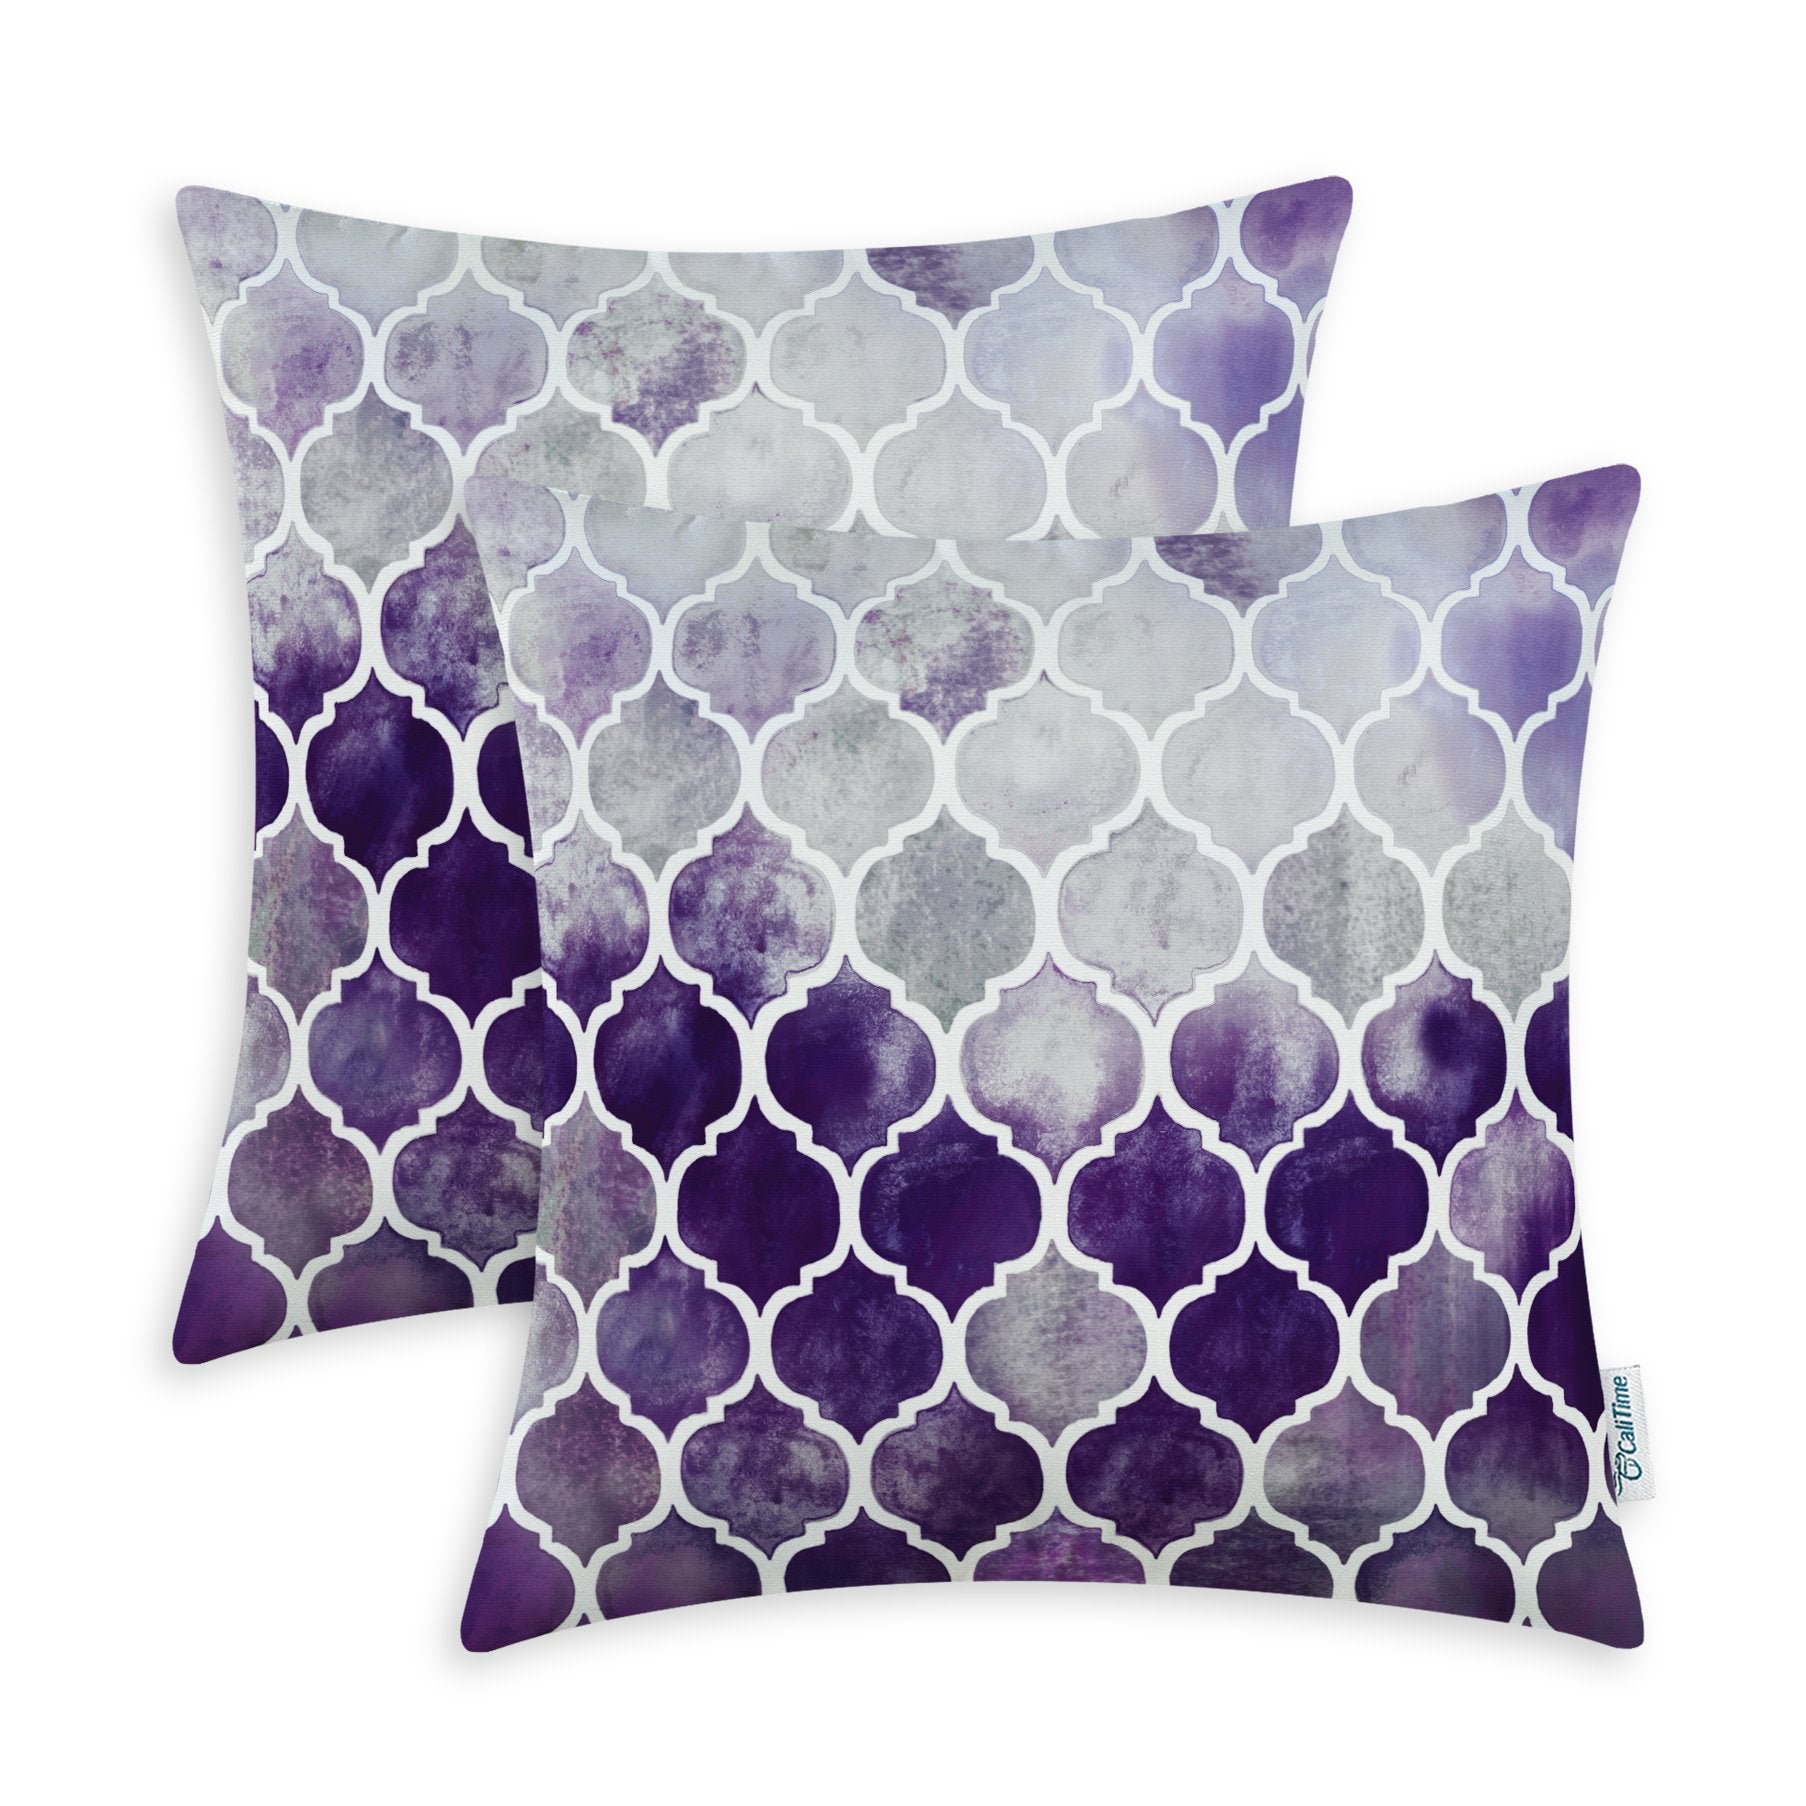 CaliTime Pack of 2 Cozy Throw Pillow Cases Covers for Couch Bed Sofa Manual Hand Painted Colorful Geometric Trellis Chain Print 45cm x 45cm Main Grey Purple Eggplant